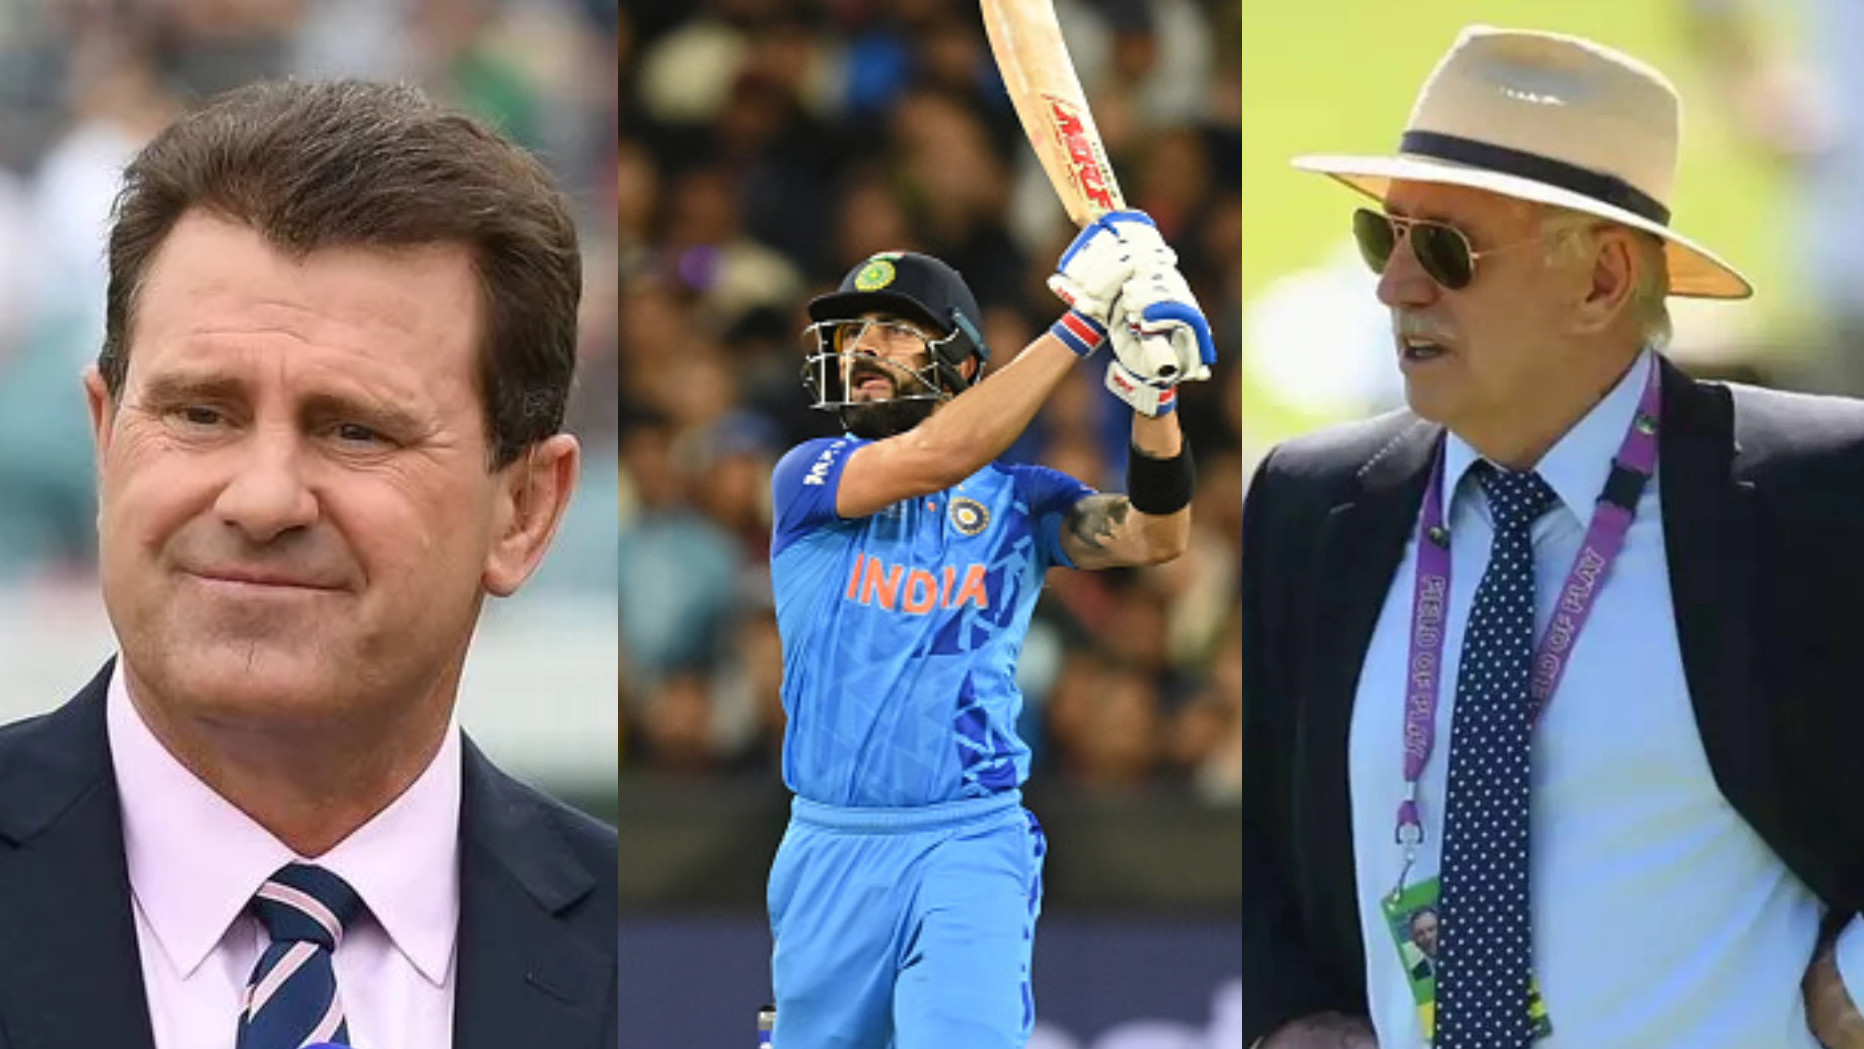 T20 World Cup 2022: Ian Chappell and Mark Taylor discuss in excitement Virat Kohli's six off Haris Rauf